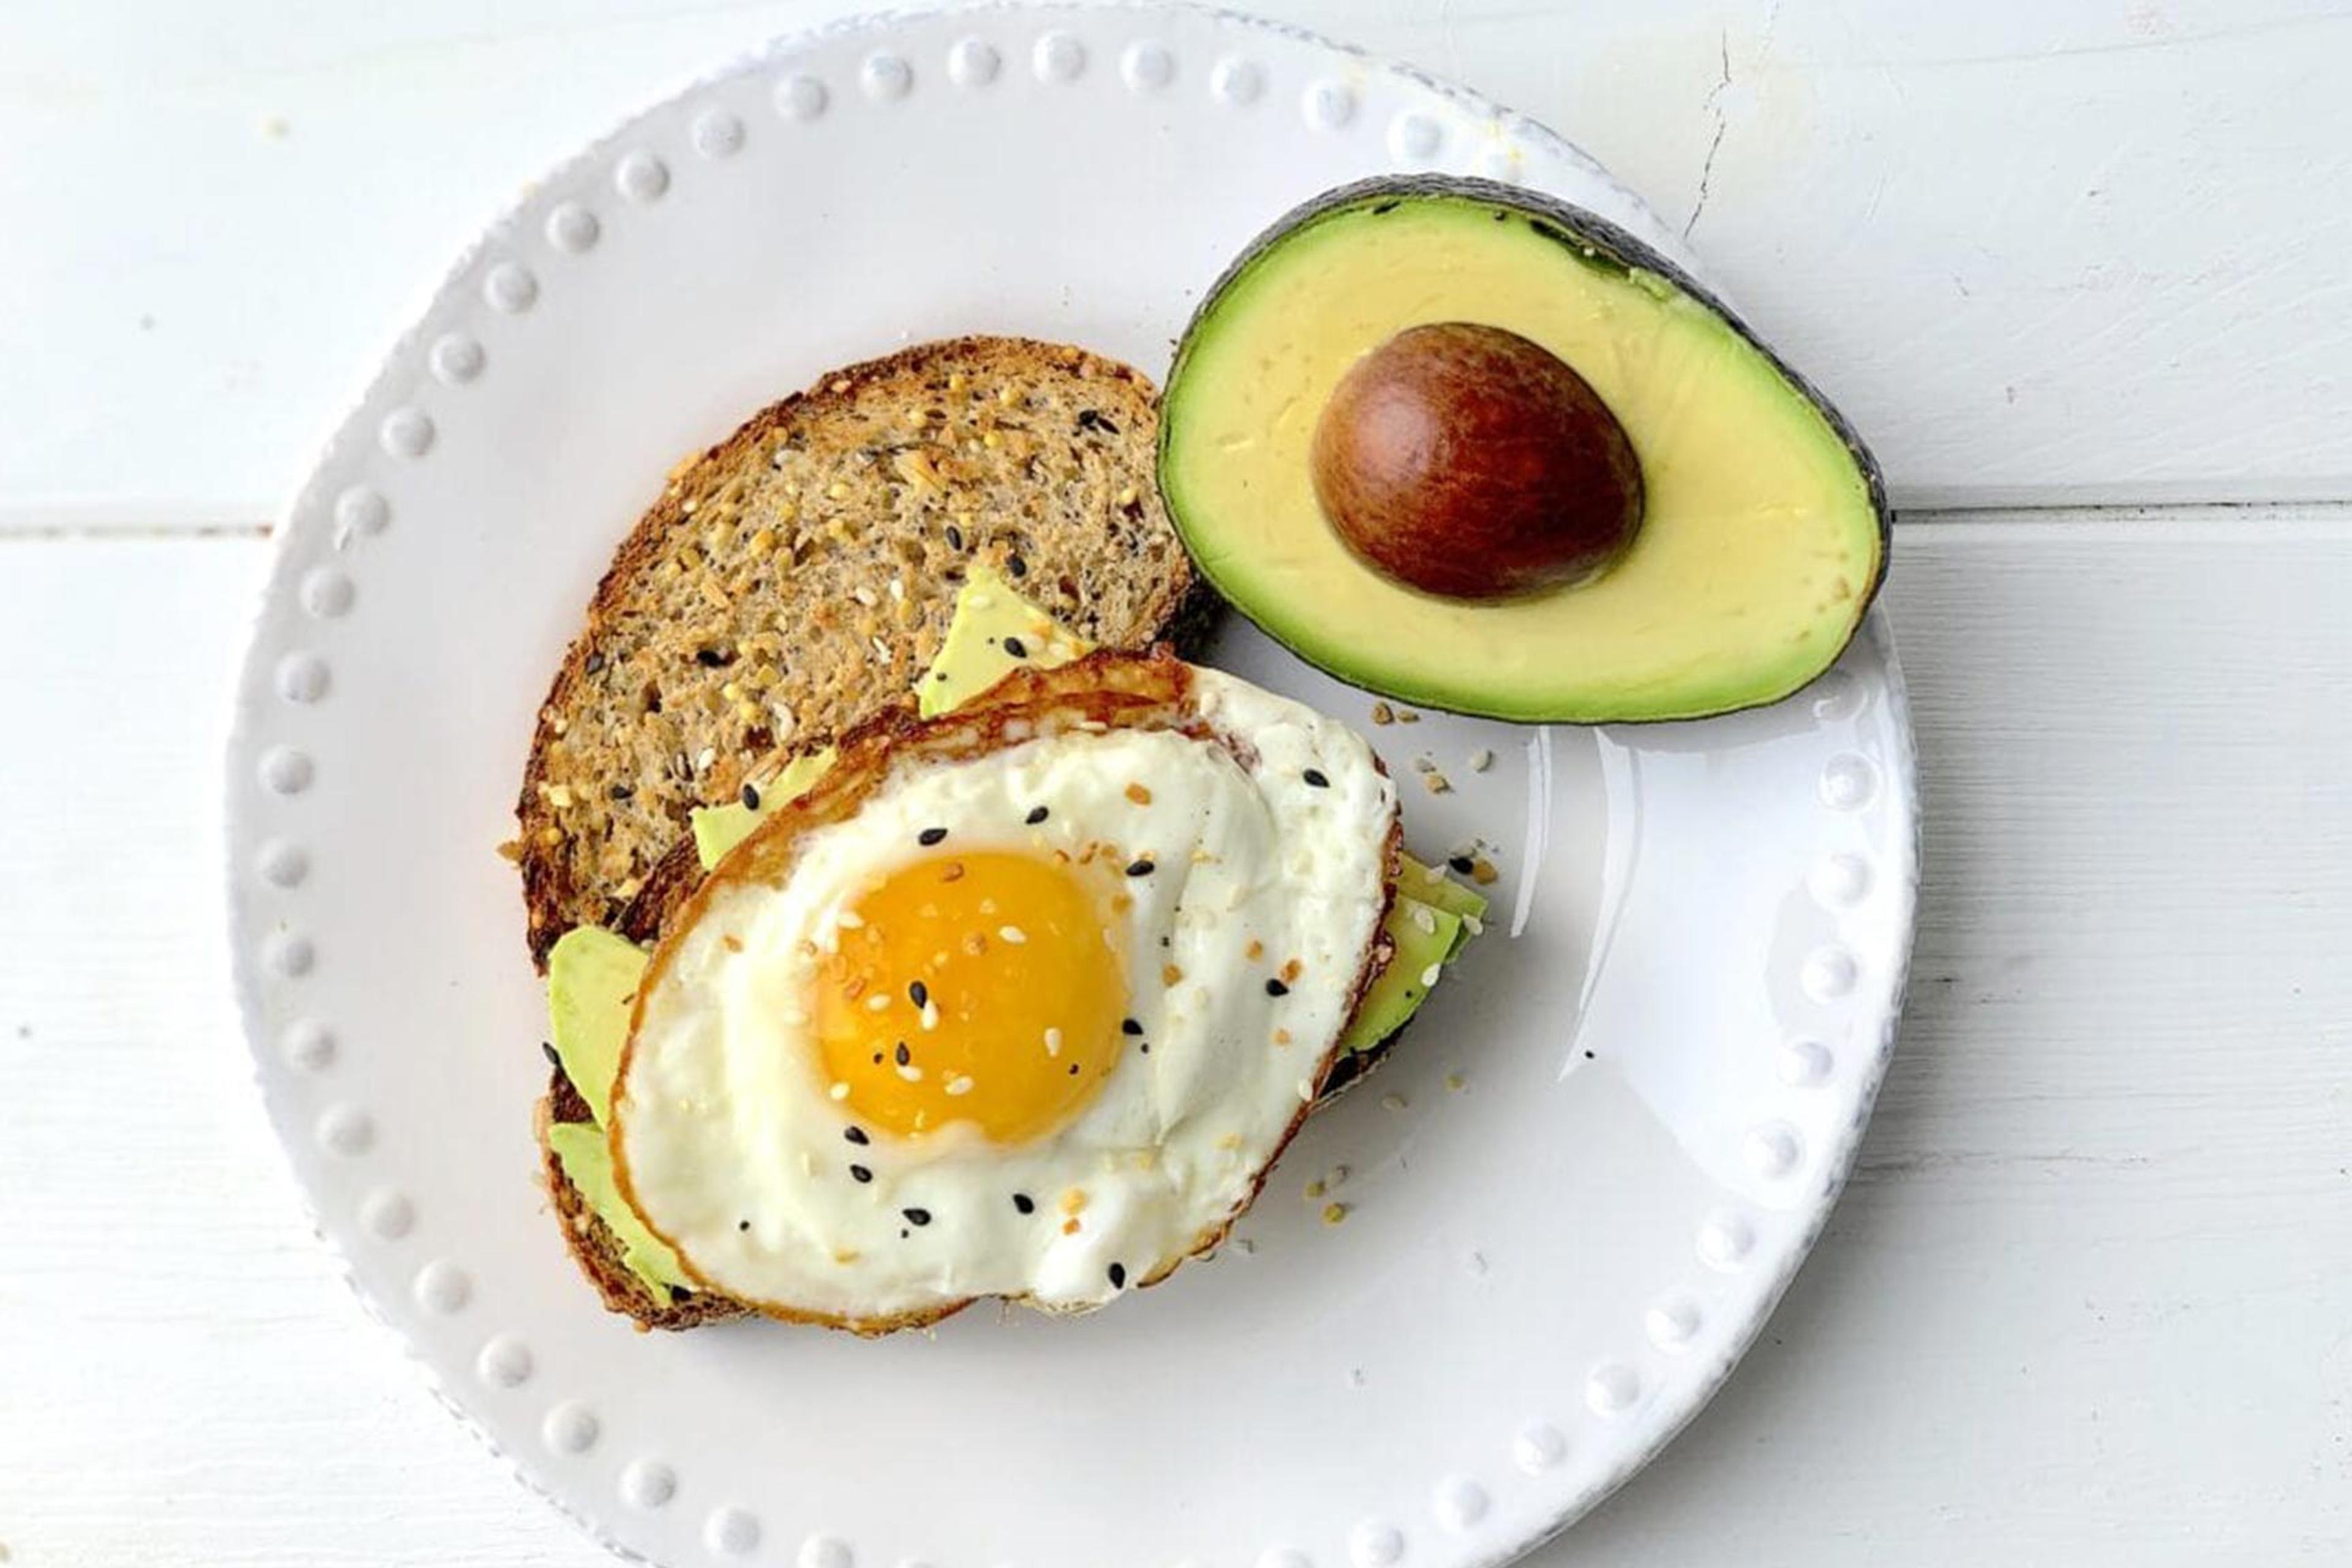 An egg dripping golden yolk over avocado toast with alfalfa sprouts.